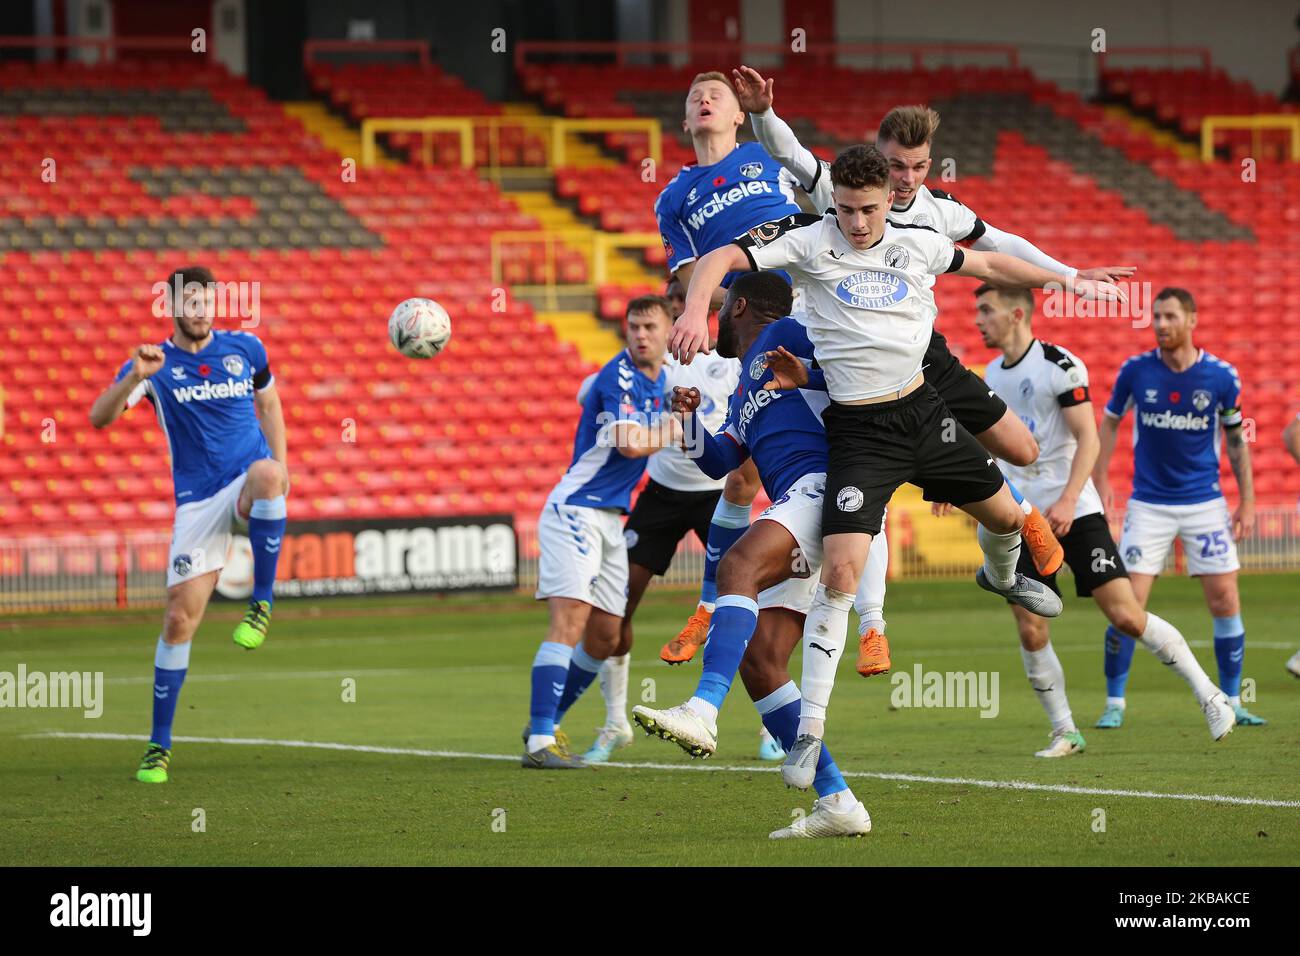 Gateshead's JJ O'Donnell and Dominic Tear in action during the FA Cup match between Gateshead and Oldham Athletic at the Gateshead International Stadium, Gateshead on Sunday 10th November 2019. (Photo by Mark Fletcher/MI News/NurPhoto) Stock Photo